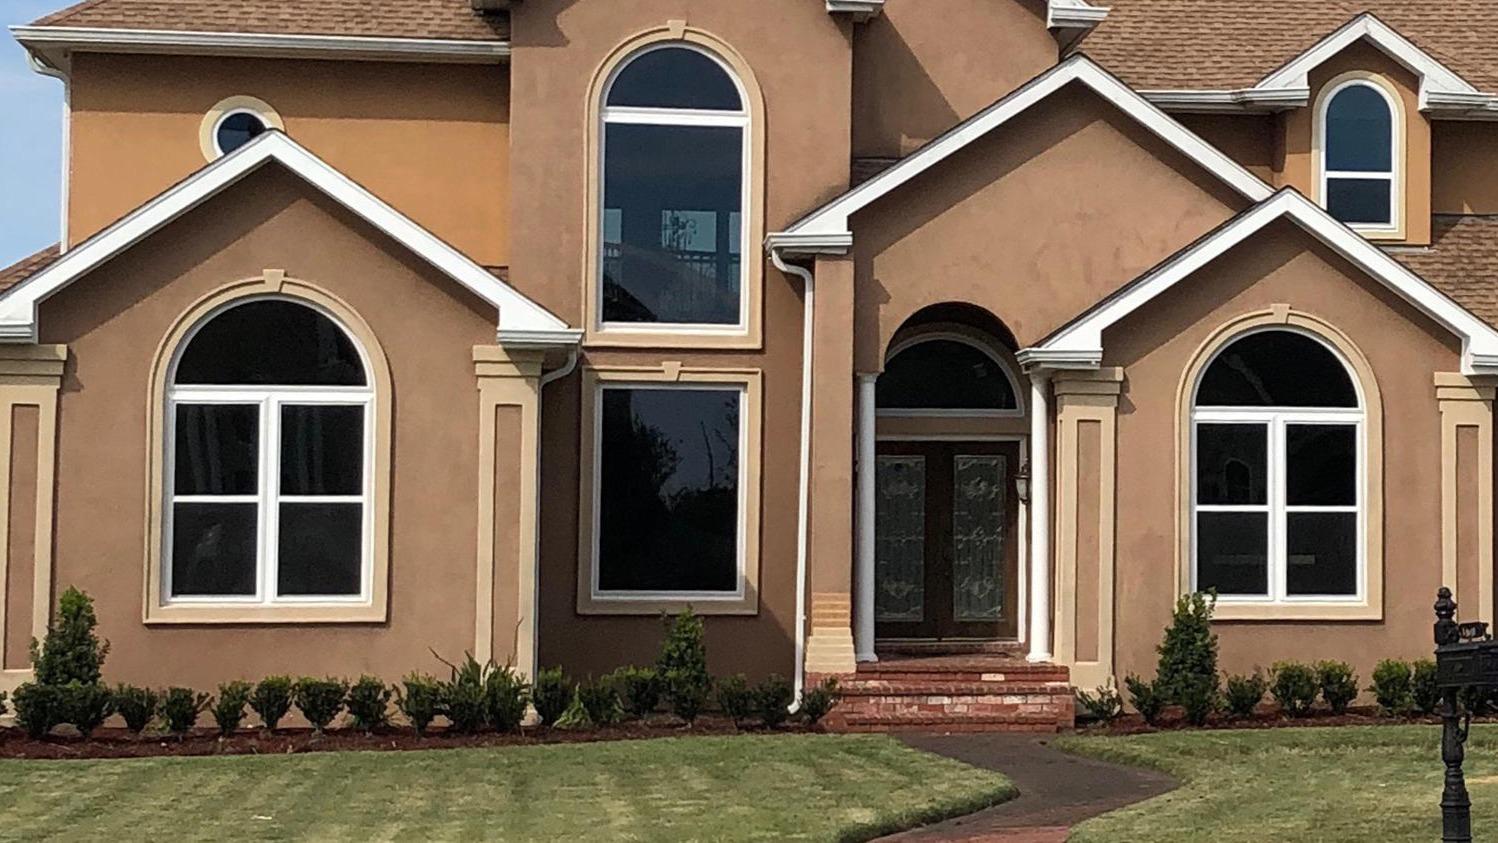 For prompt and reliable window repair services, Window Worxx DFW is your trusted local partner. We are conveniently located to serve your immediate window repair needs. Our skilled technicians are ready to address any window issues, providing fast and efficient solutions to ensure your windows are in optimal condition.